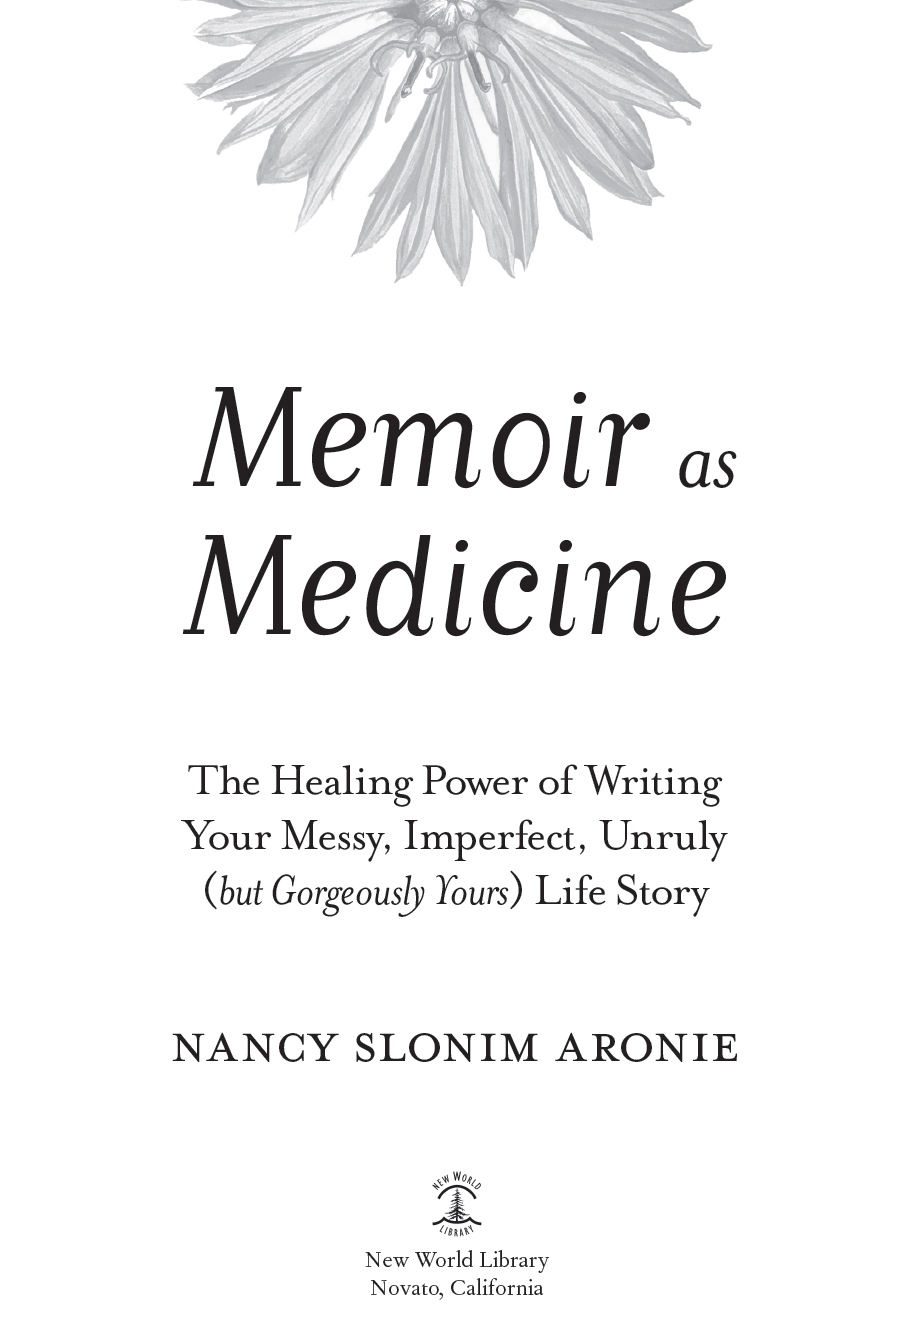 Memoir as Medicine The Healing Power of Writing Your Messy Imperfect Unruly but Gorgeously Yours Life Story - image 3